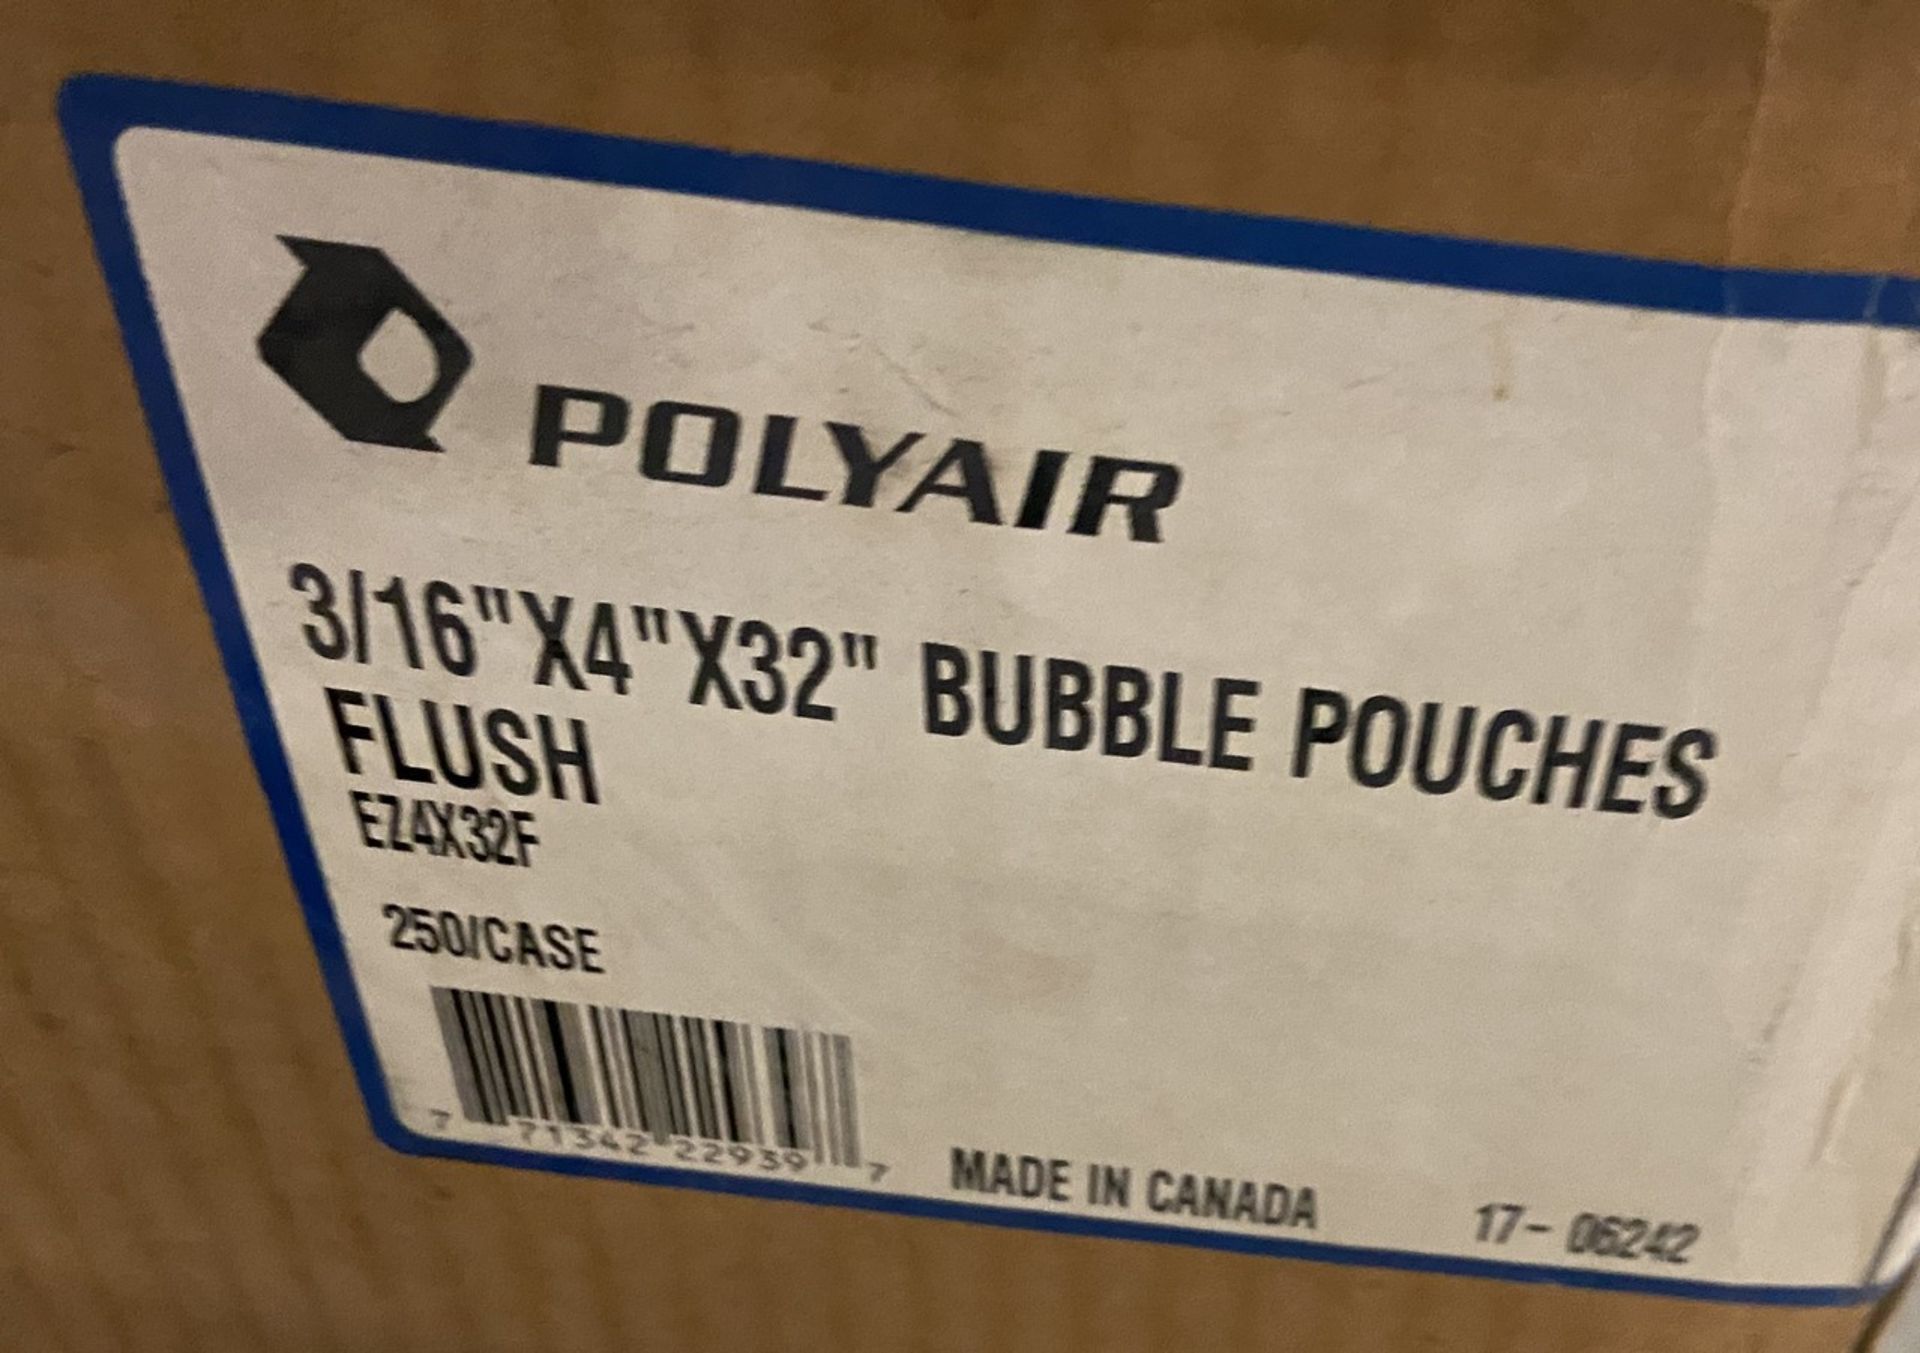 POLYAIR BUBBLE POUCHES - Image 5 of 5